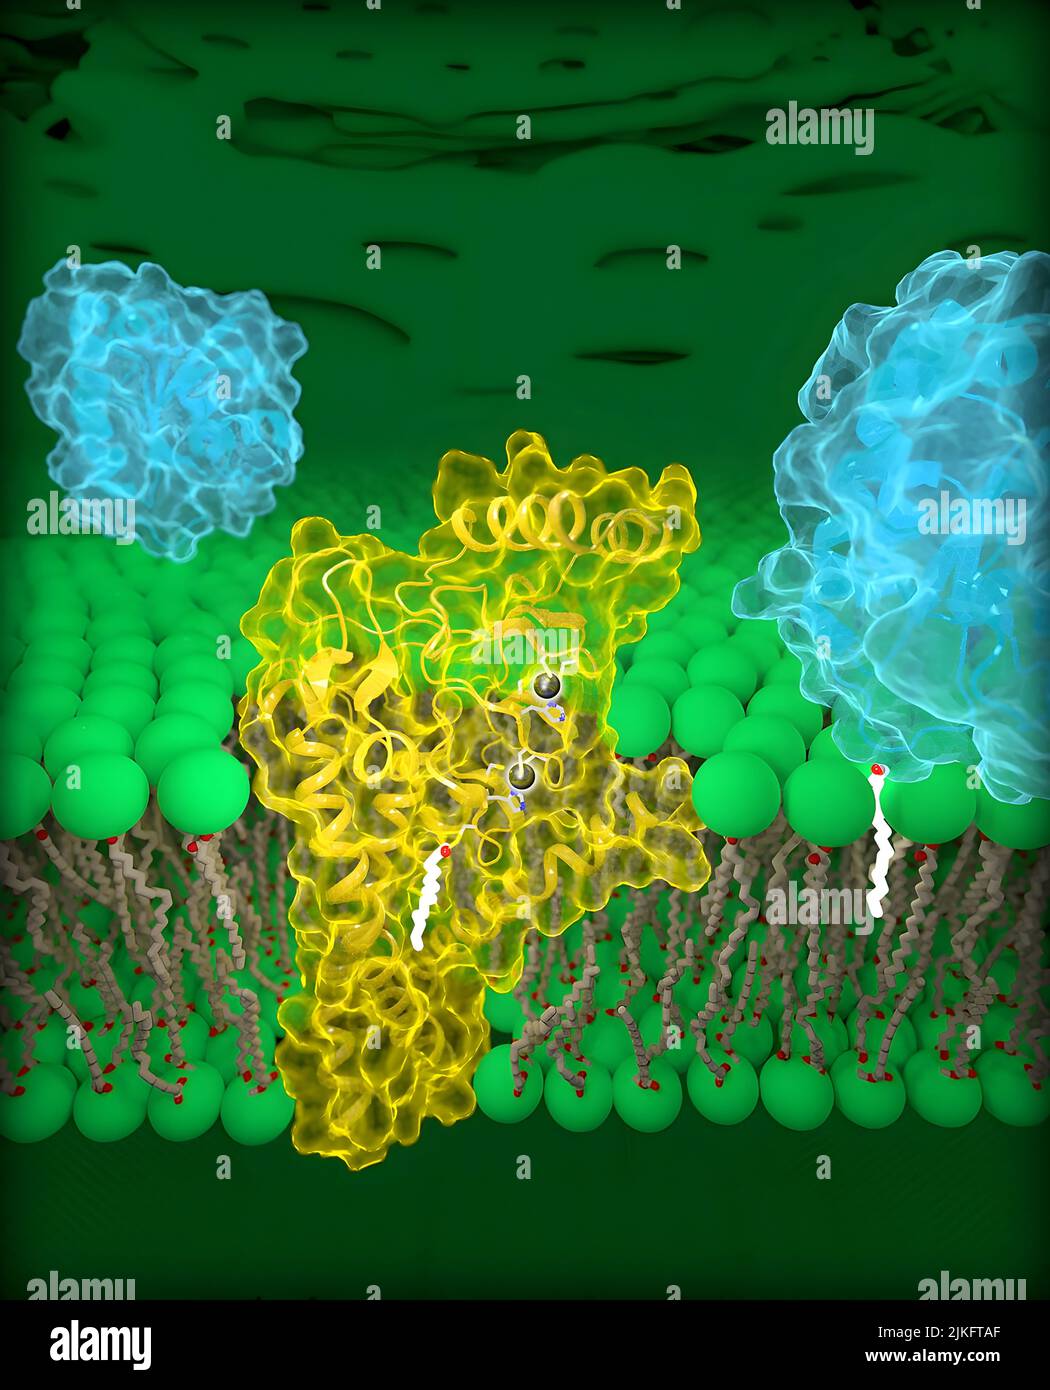 In this image: Molecular view of DHHC palmitoyltransferases. Human DHHC20 (yellow) is embedded in the Golgi membrane (green), a compartment located inside cells. DHHC20 attaches a chain of fatty acids (white) to a target protein (blue, foreground), which anchors the protein to the Golgi membrane. Stock Photo